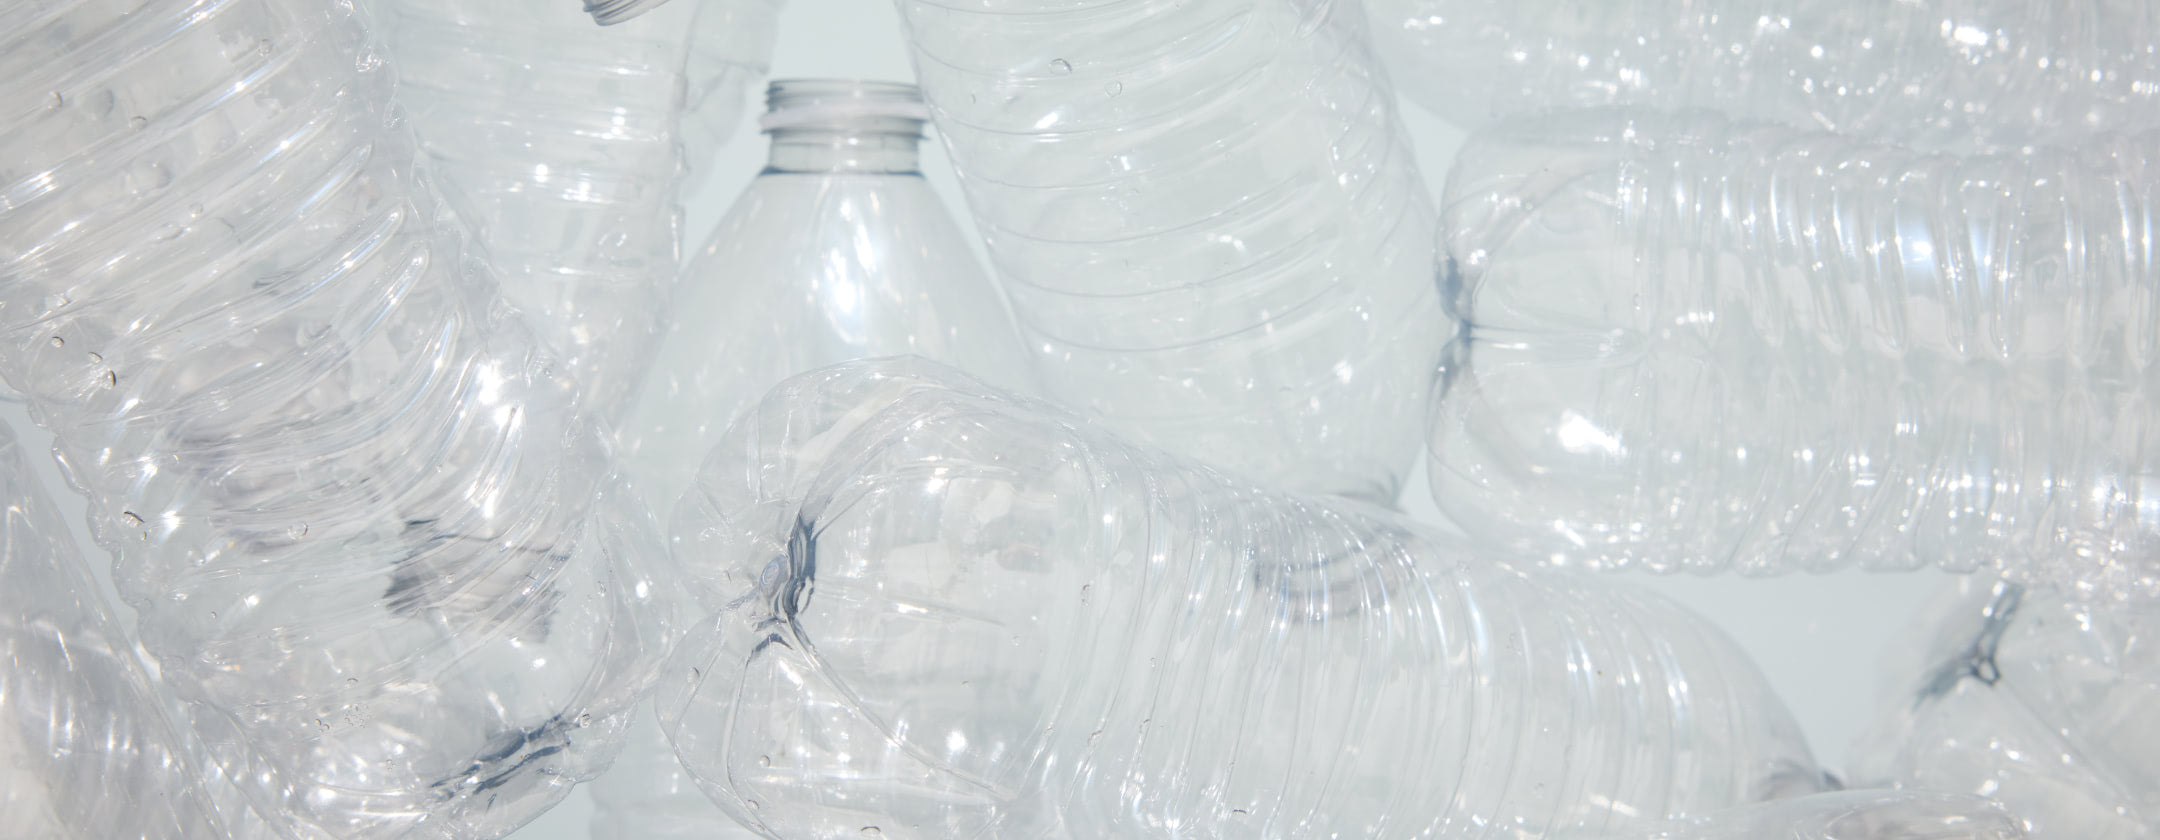 Image depicting close up of recyled plastic water bottles.